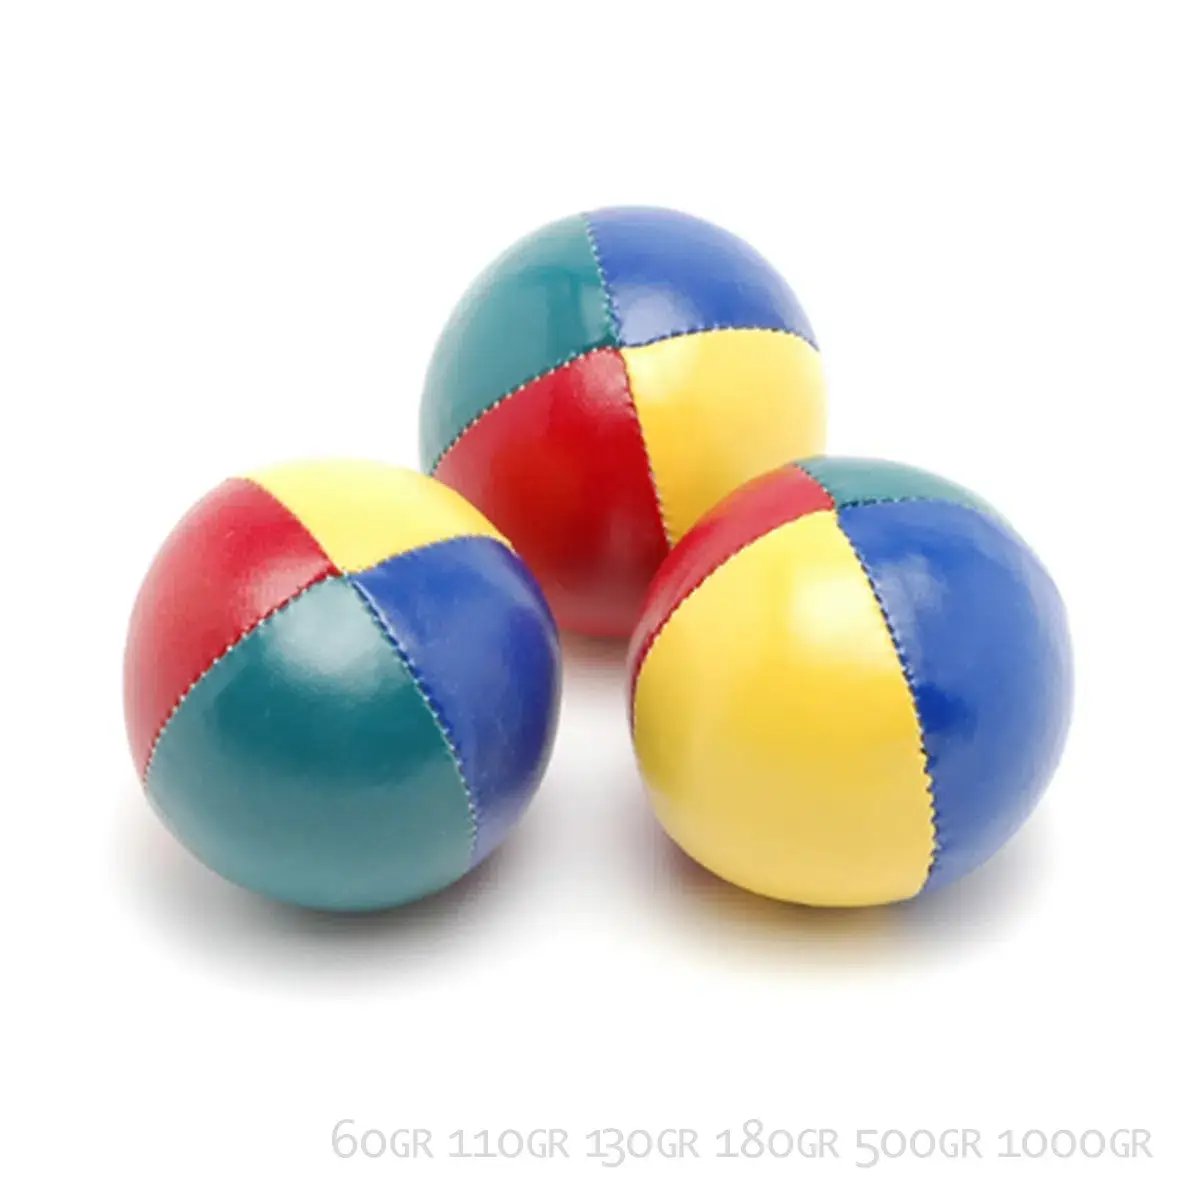 Mister Babache Juggling ball 2 colors